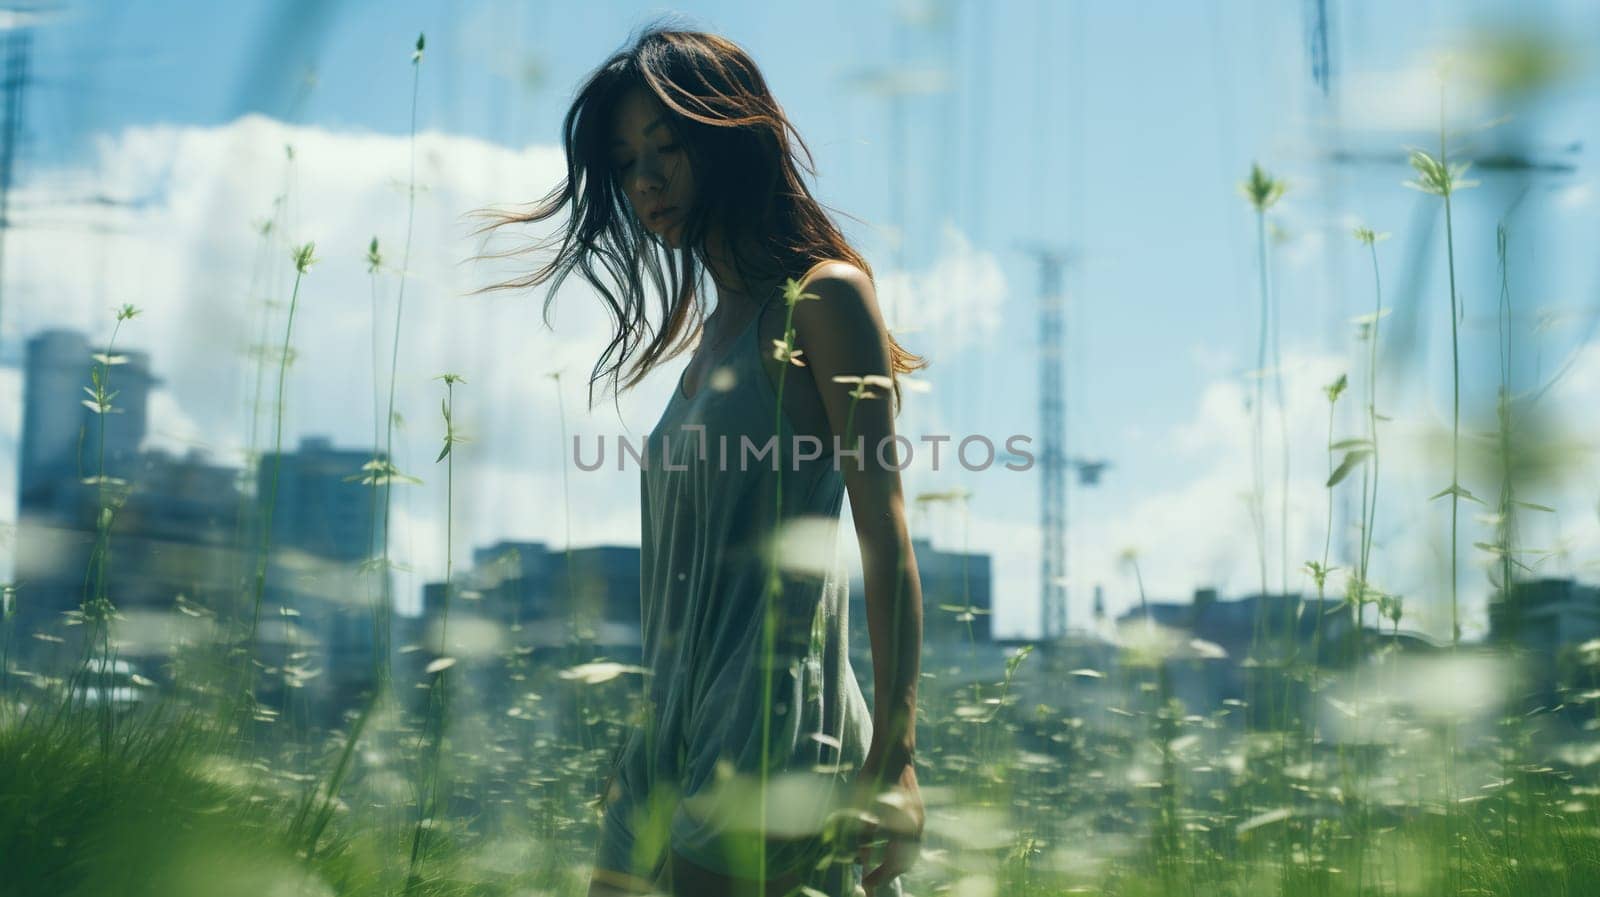 Side view of a dark-haired girl in a rice field near the city.